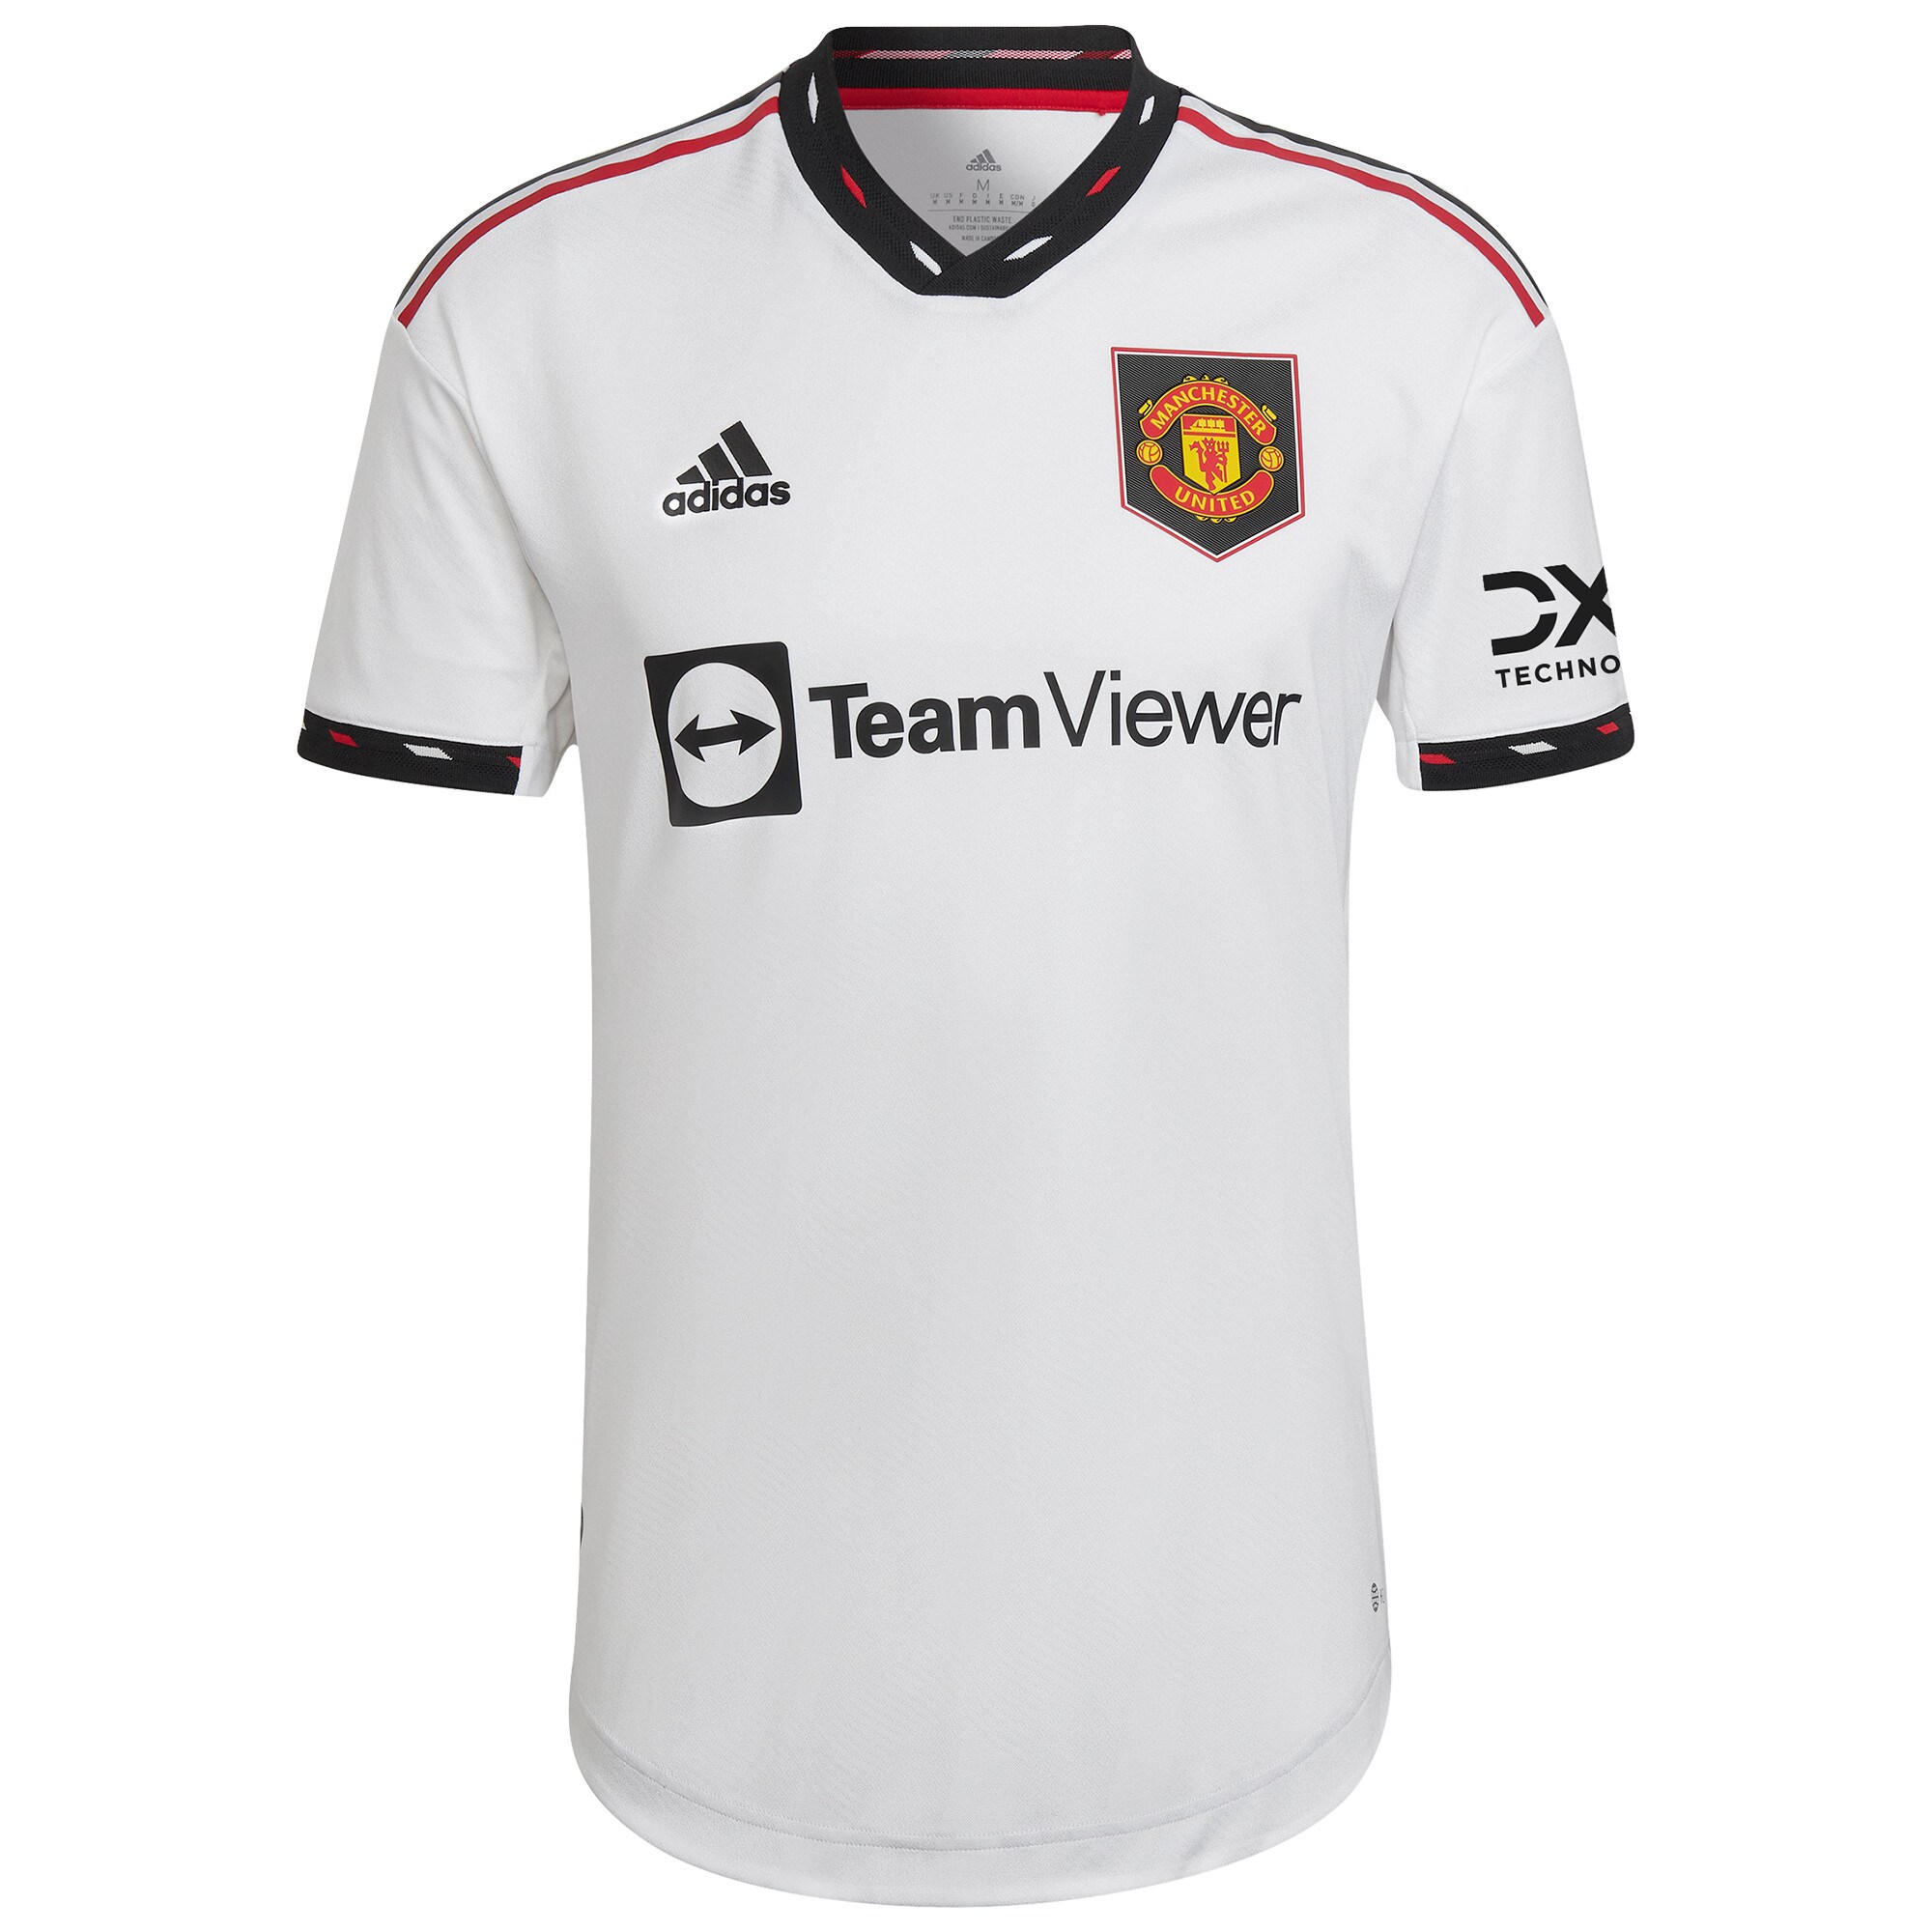 Manchester United Away Authentic Shirt 2022-2023 with Maguire 5 printing